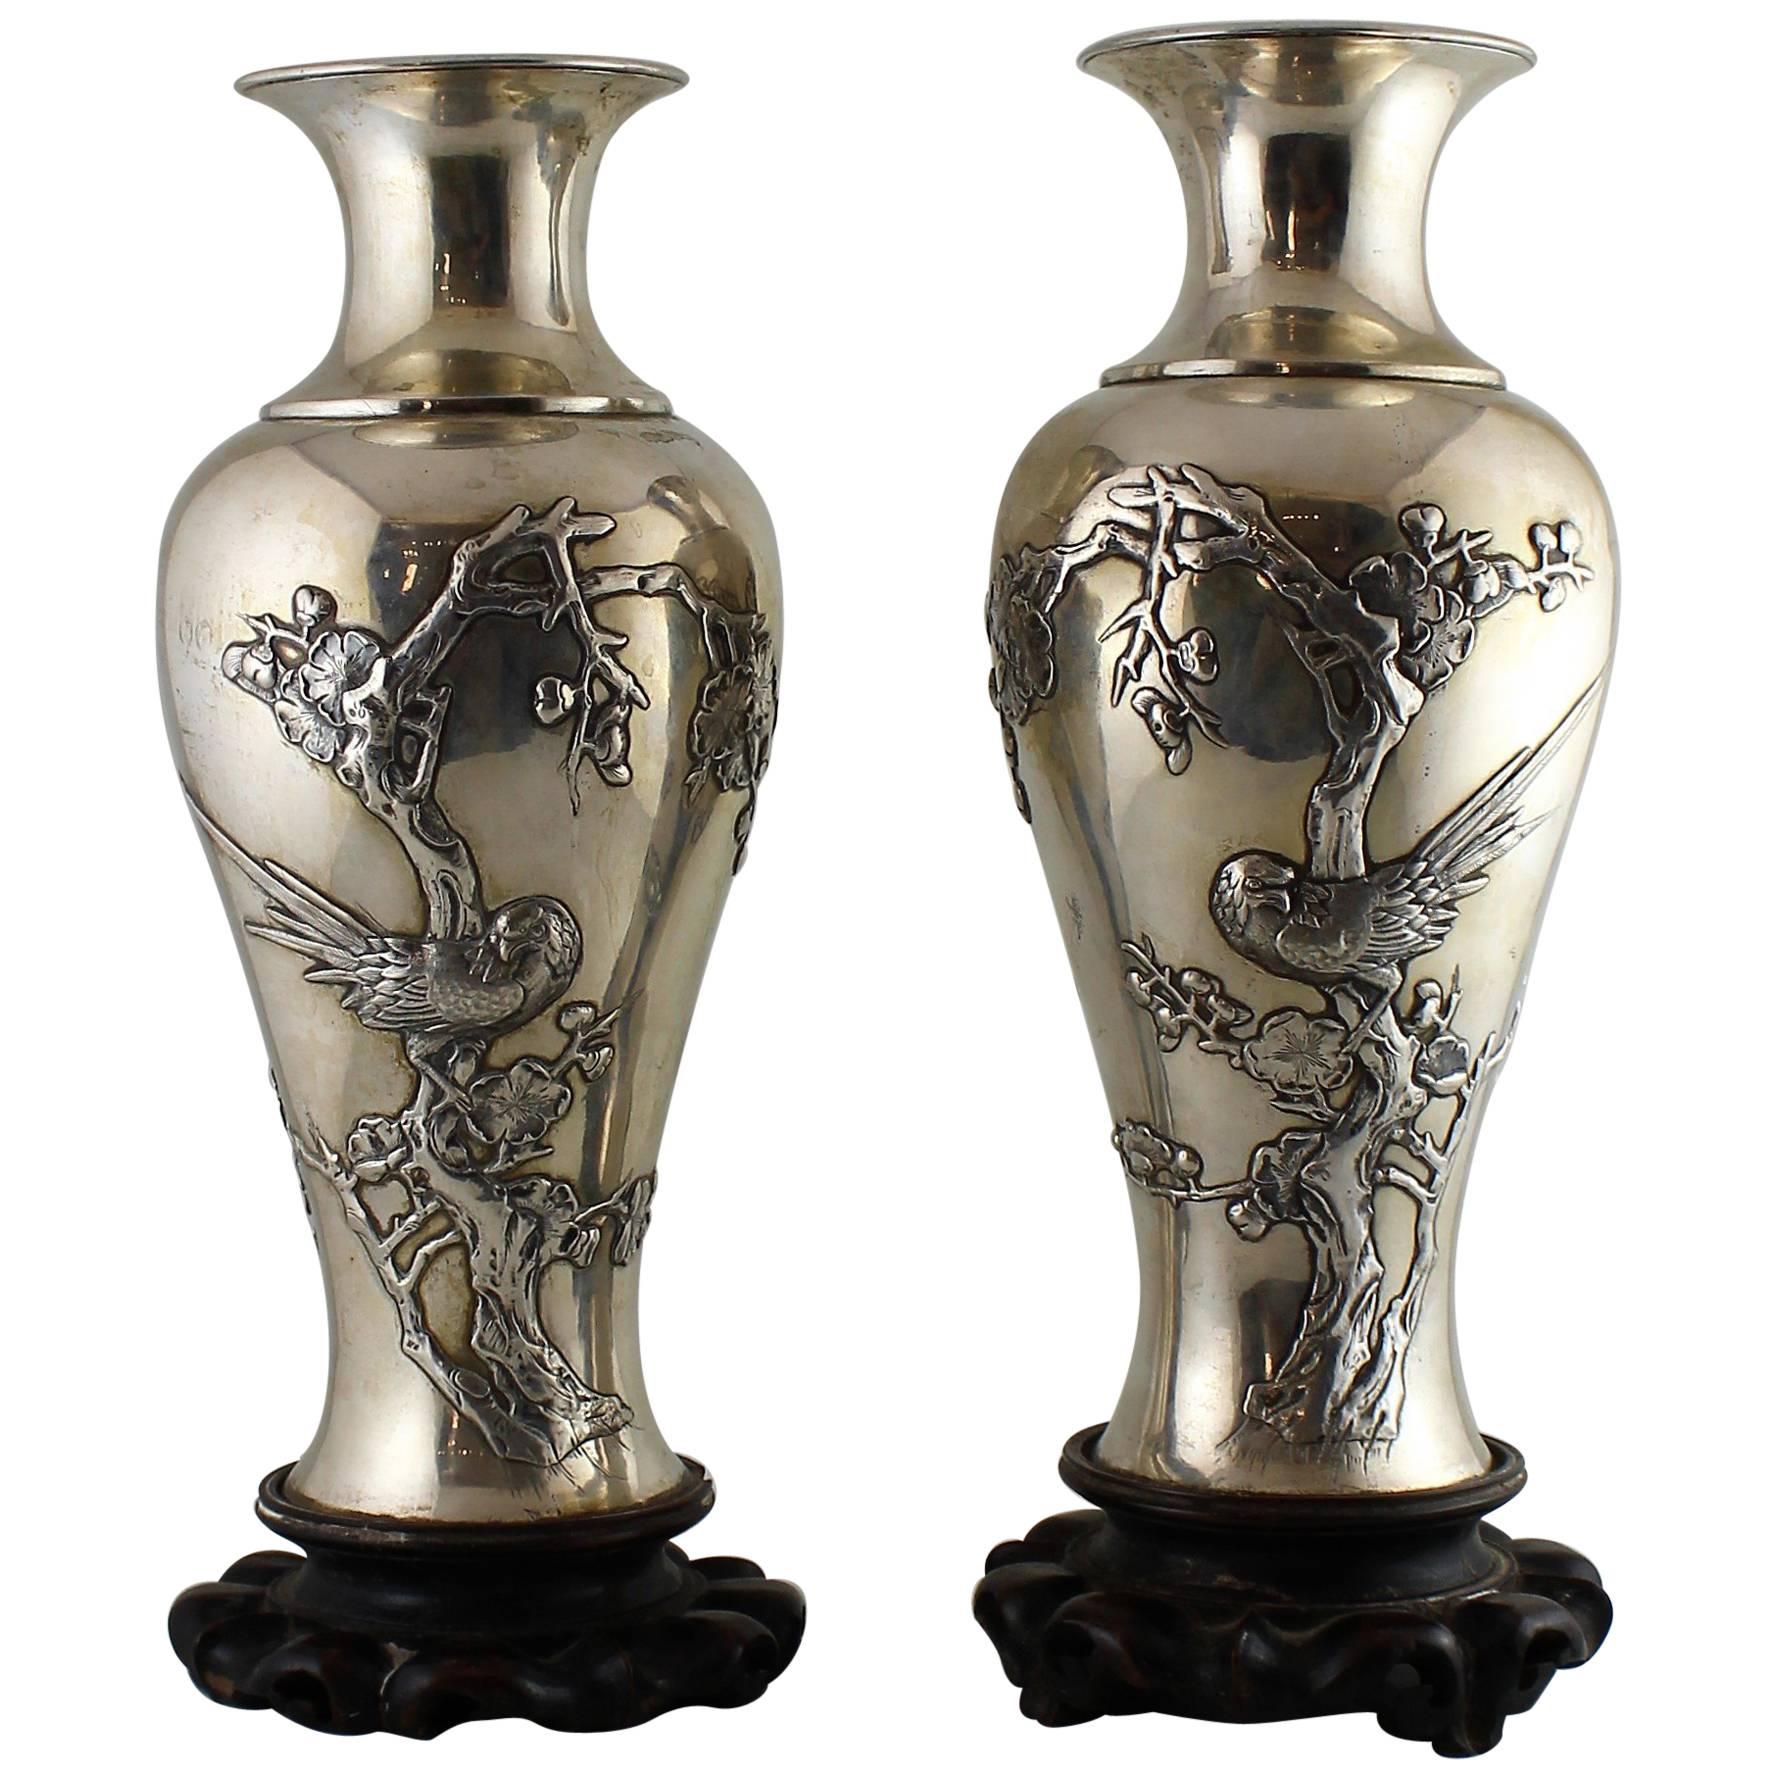 Pair of 19th Century Chinese Pao Kuang 'Canton' Silver Vases